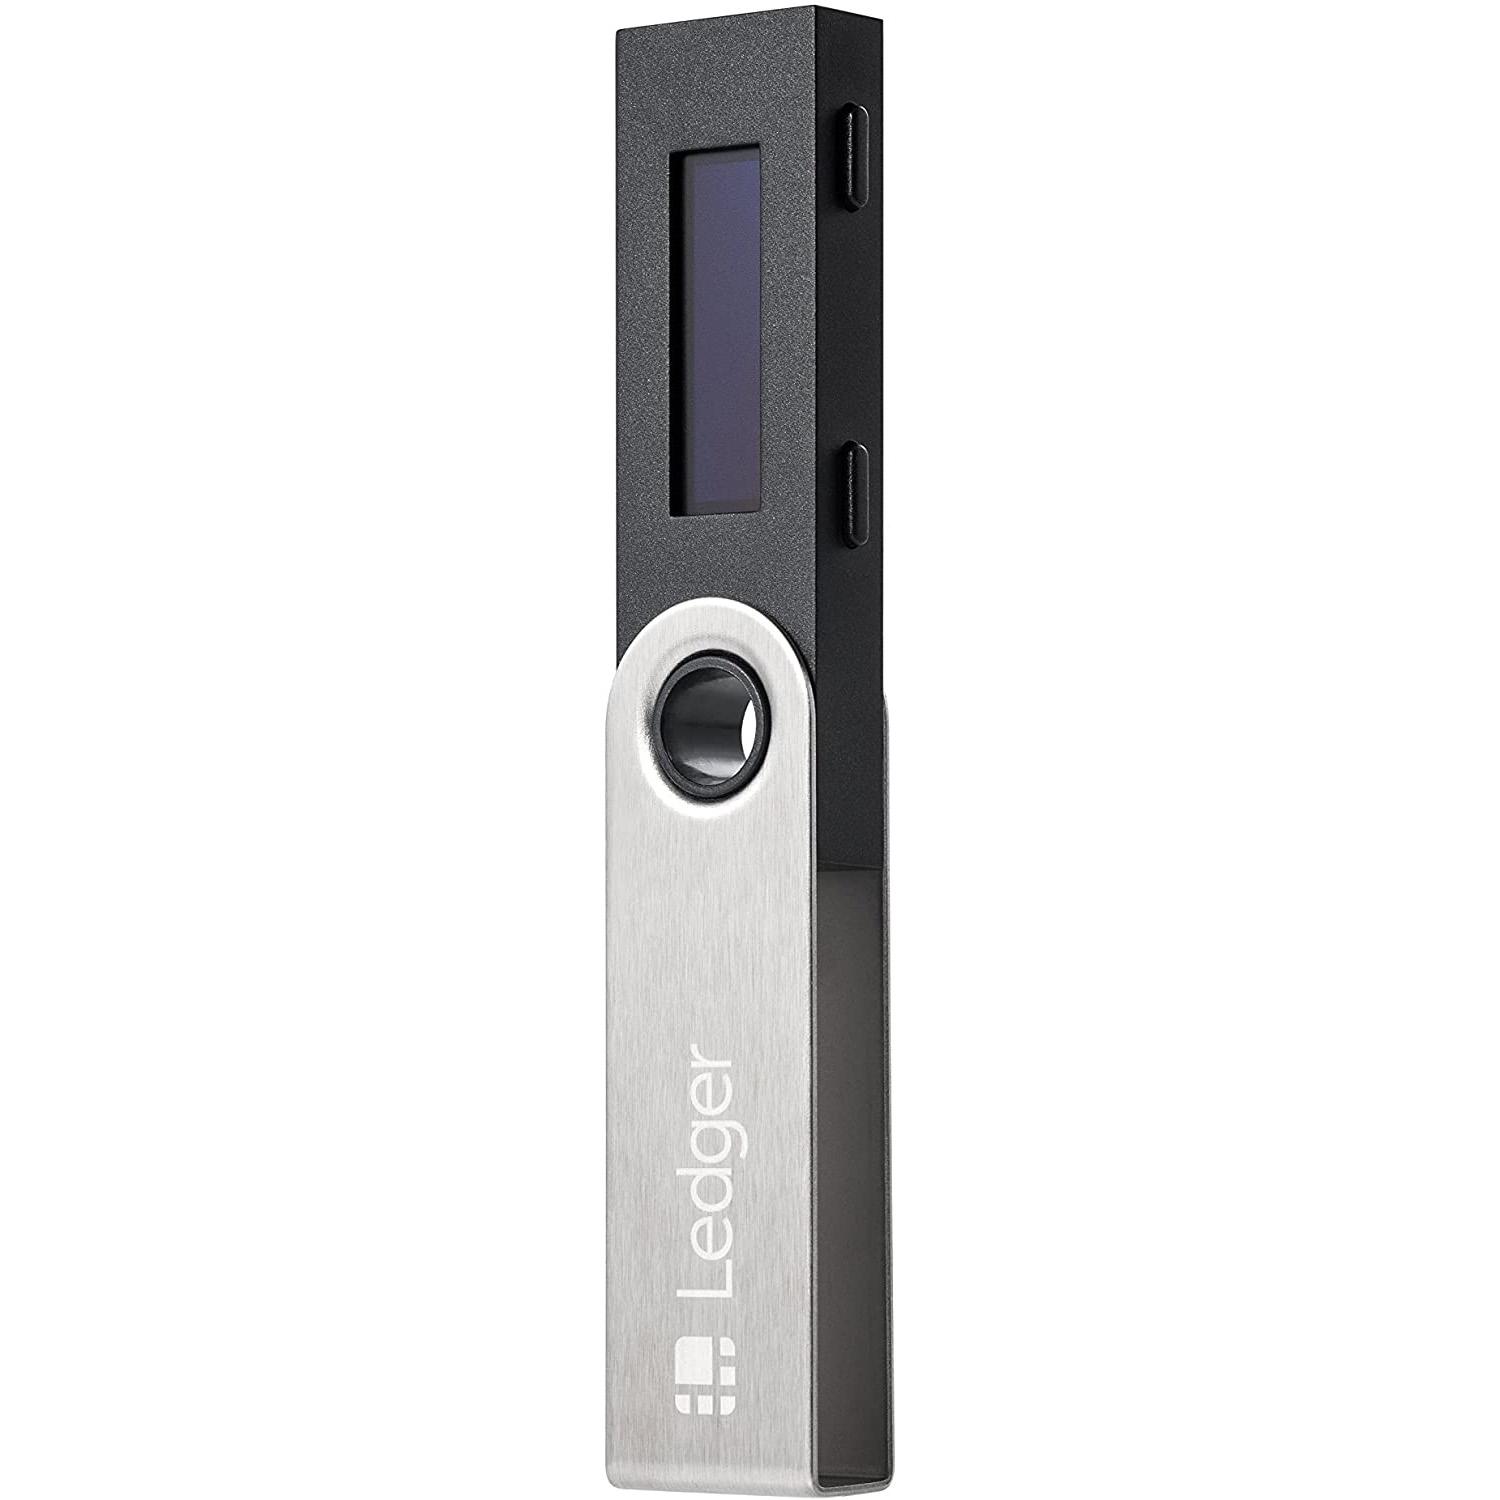 Ledger Nano S Cryptocurrency Hardware Wallet for $41.30 Shipped